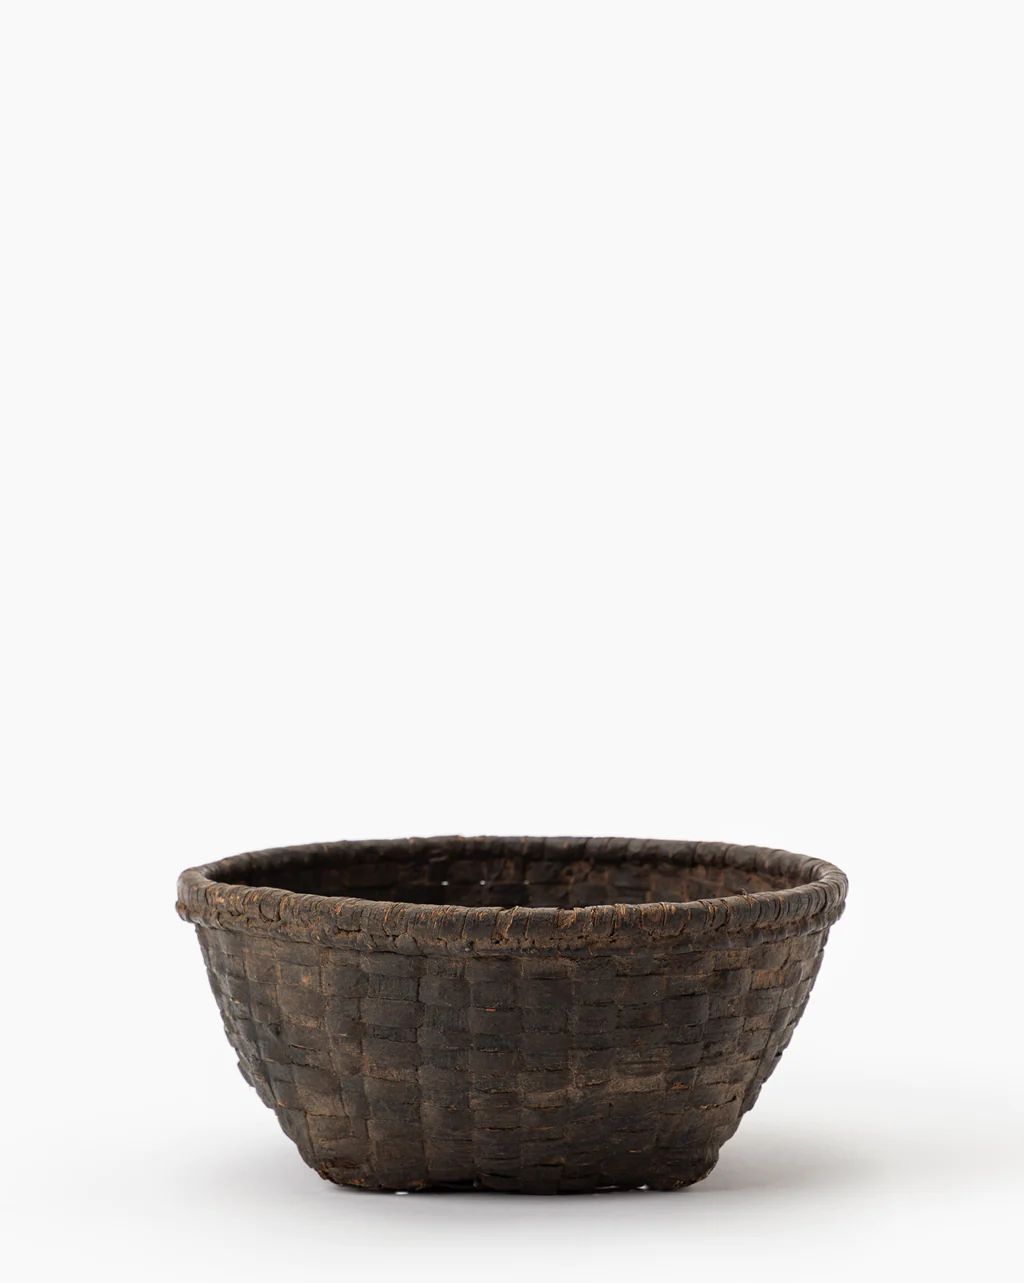 Found Weathered Cane Basket | McGee & Co.